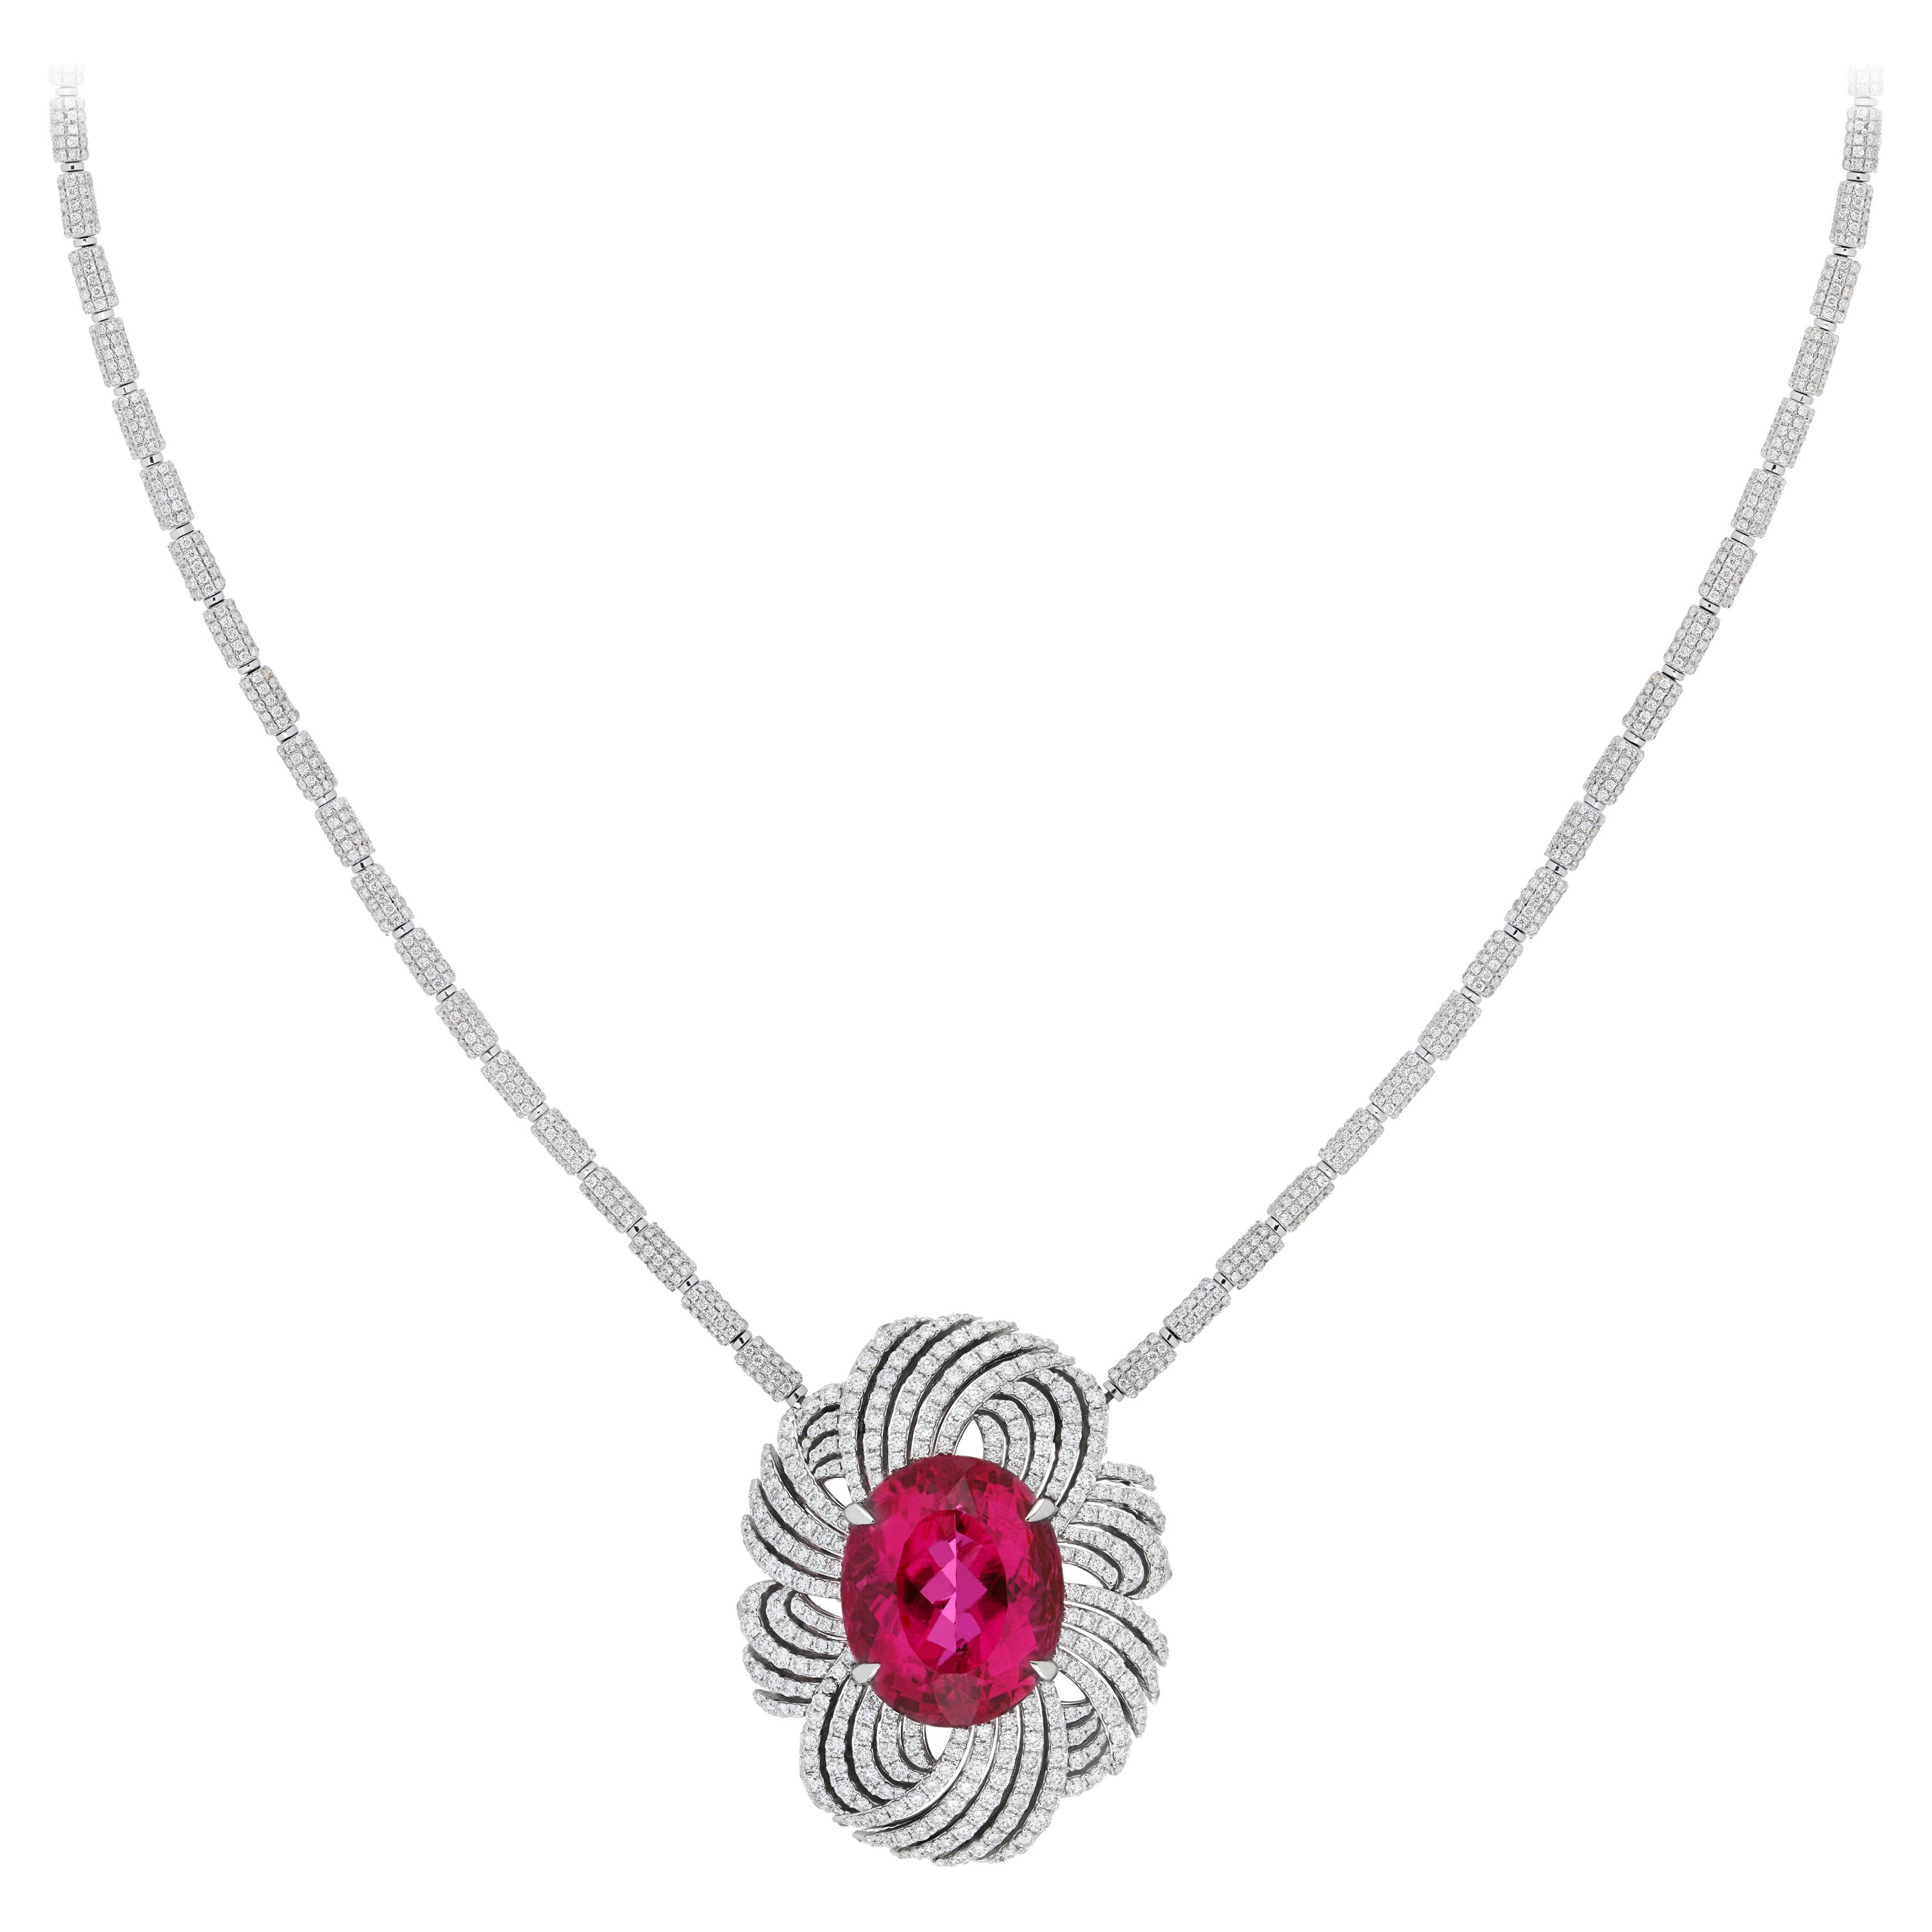 One of a Kind 22 Carat Rubellite and Diamond Necklace in 18K White Gold For Sale